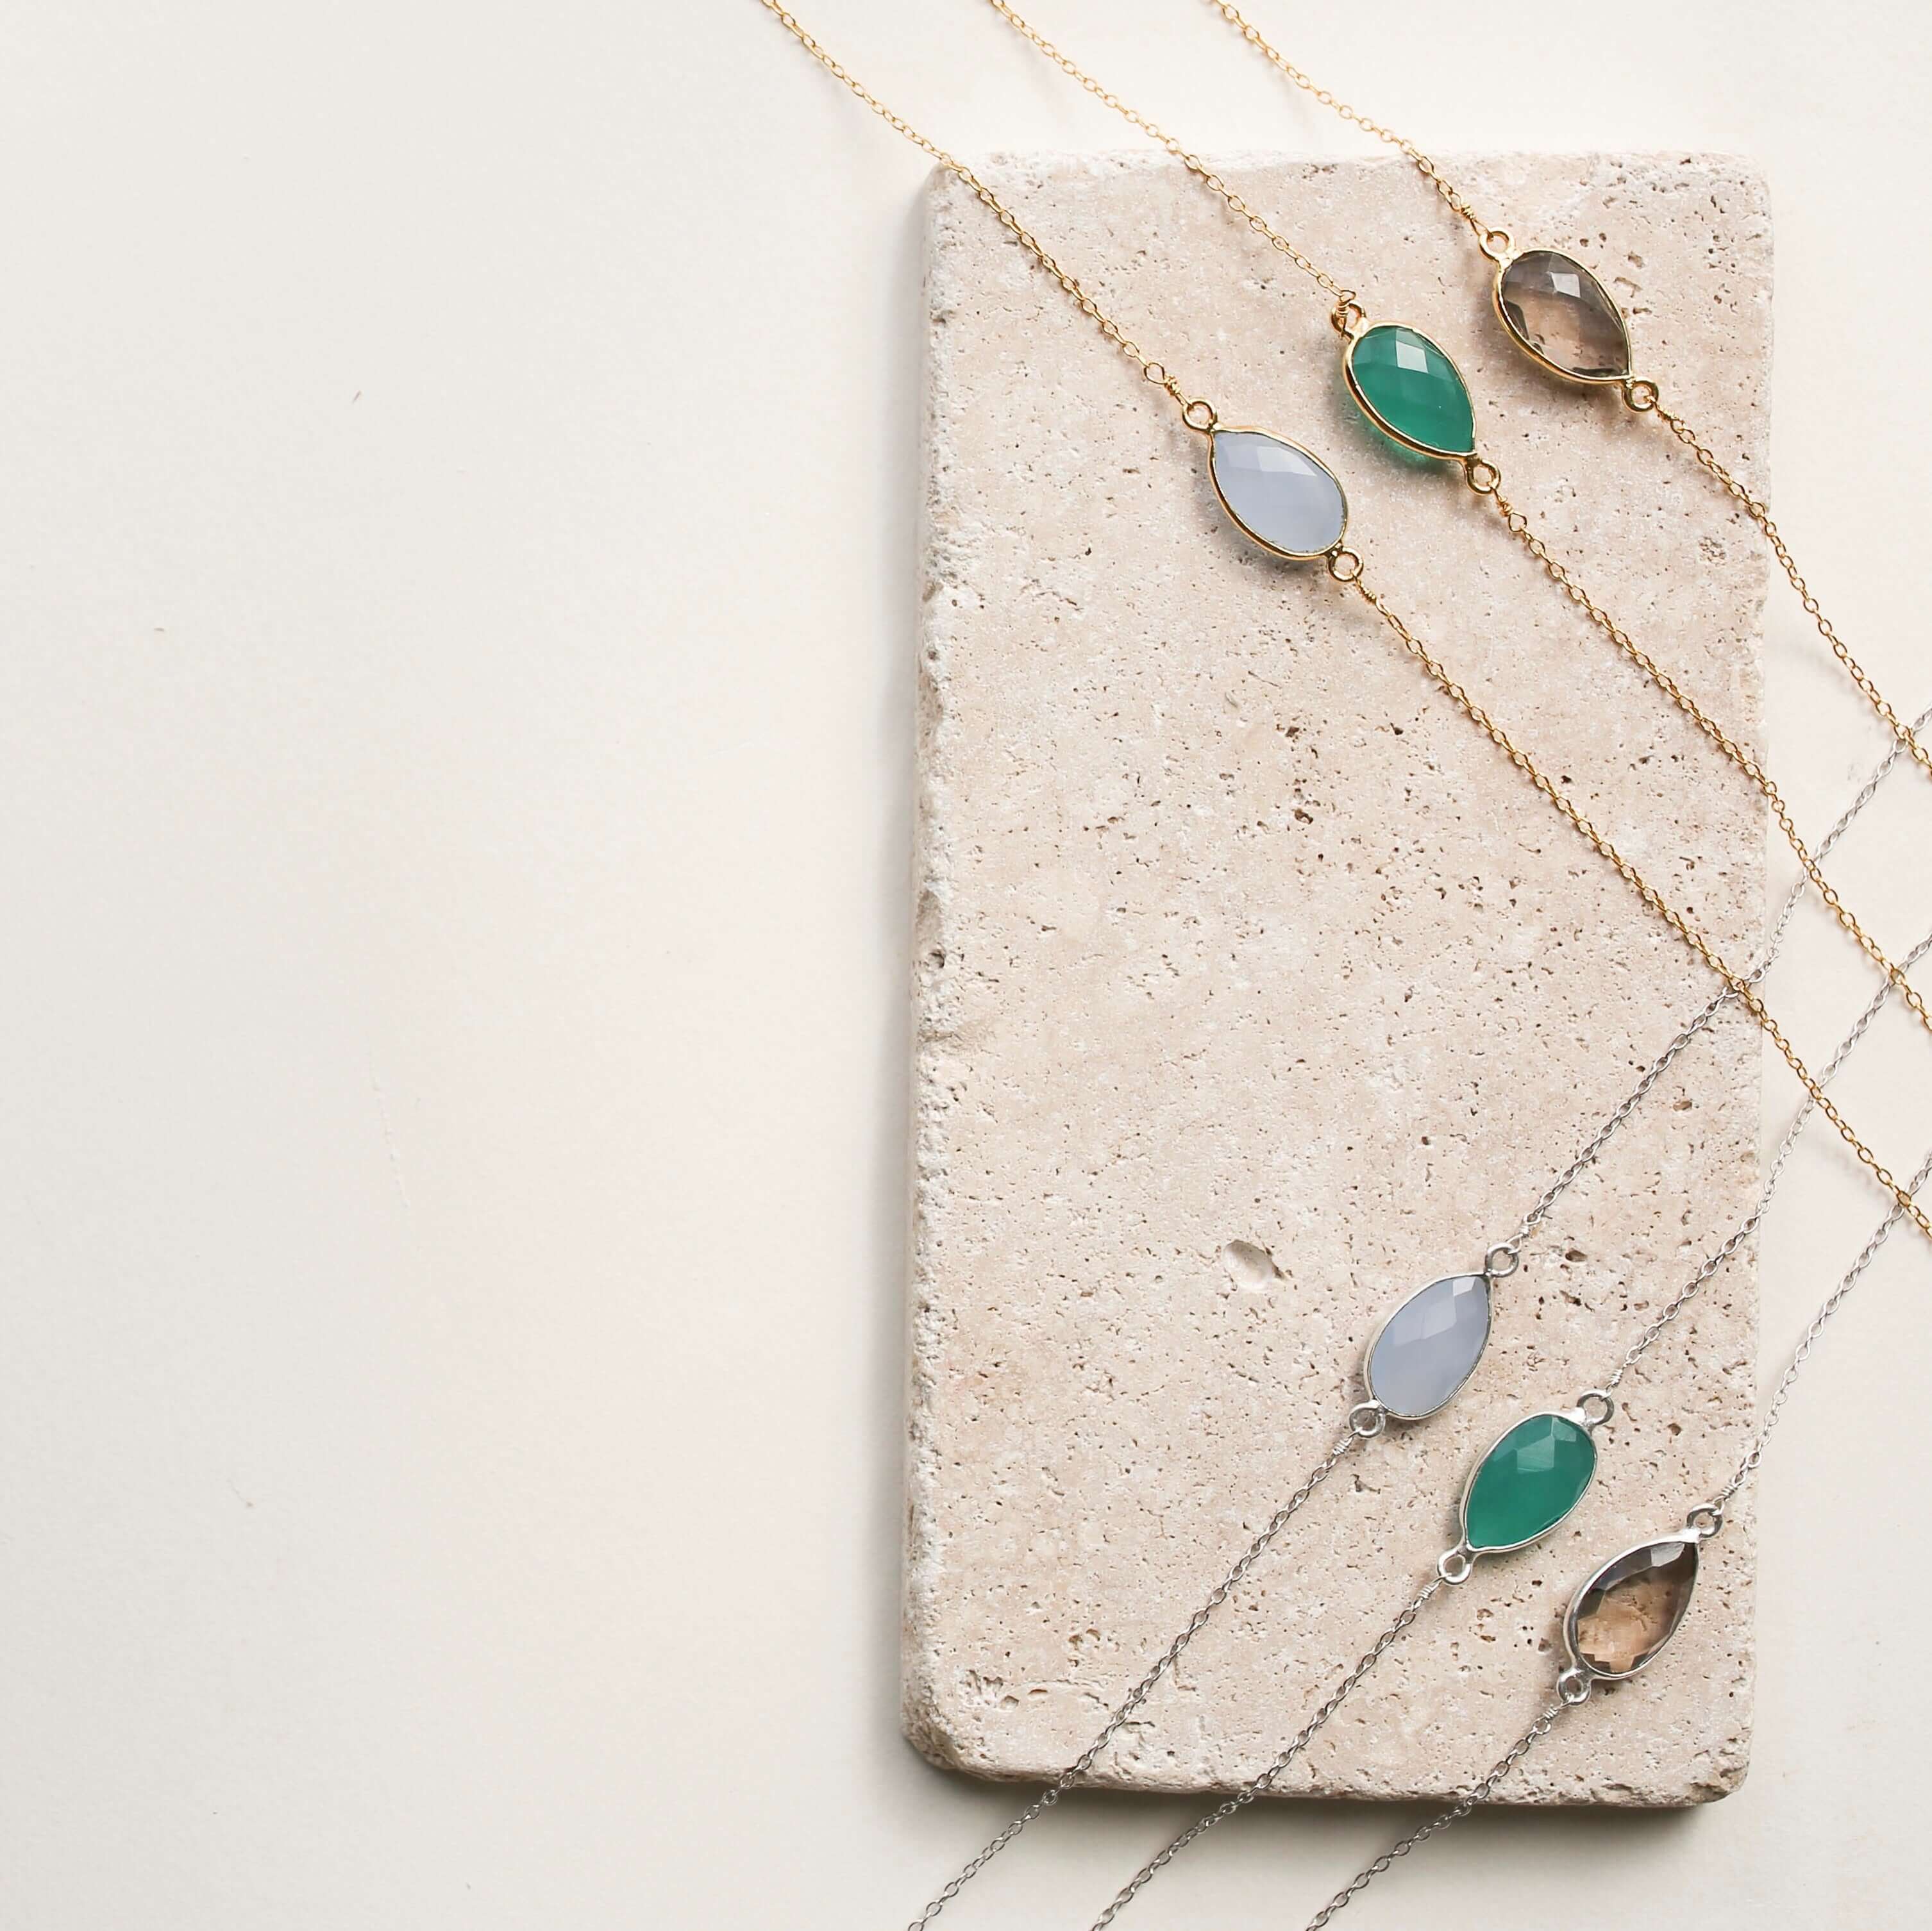 Minimalist Gold Necklace Featuring a Colorful Gem Stone